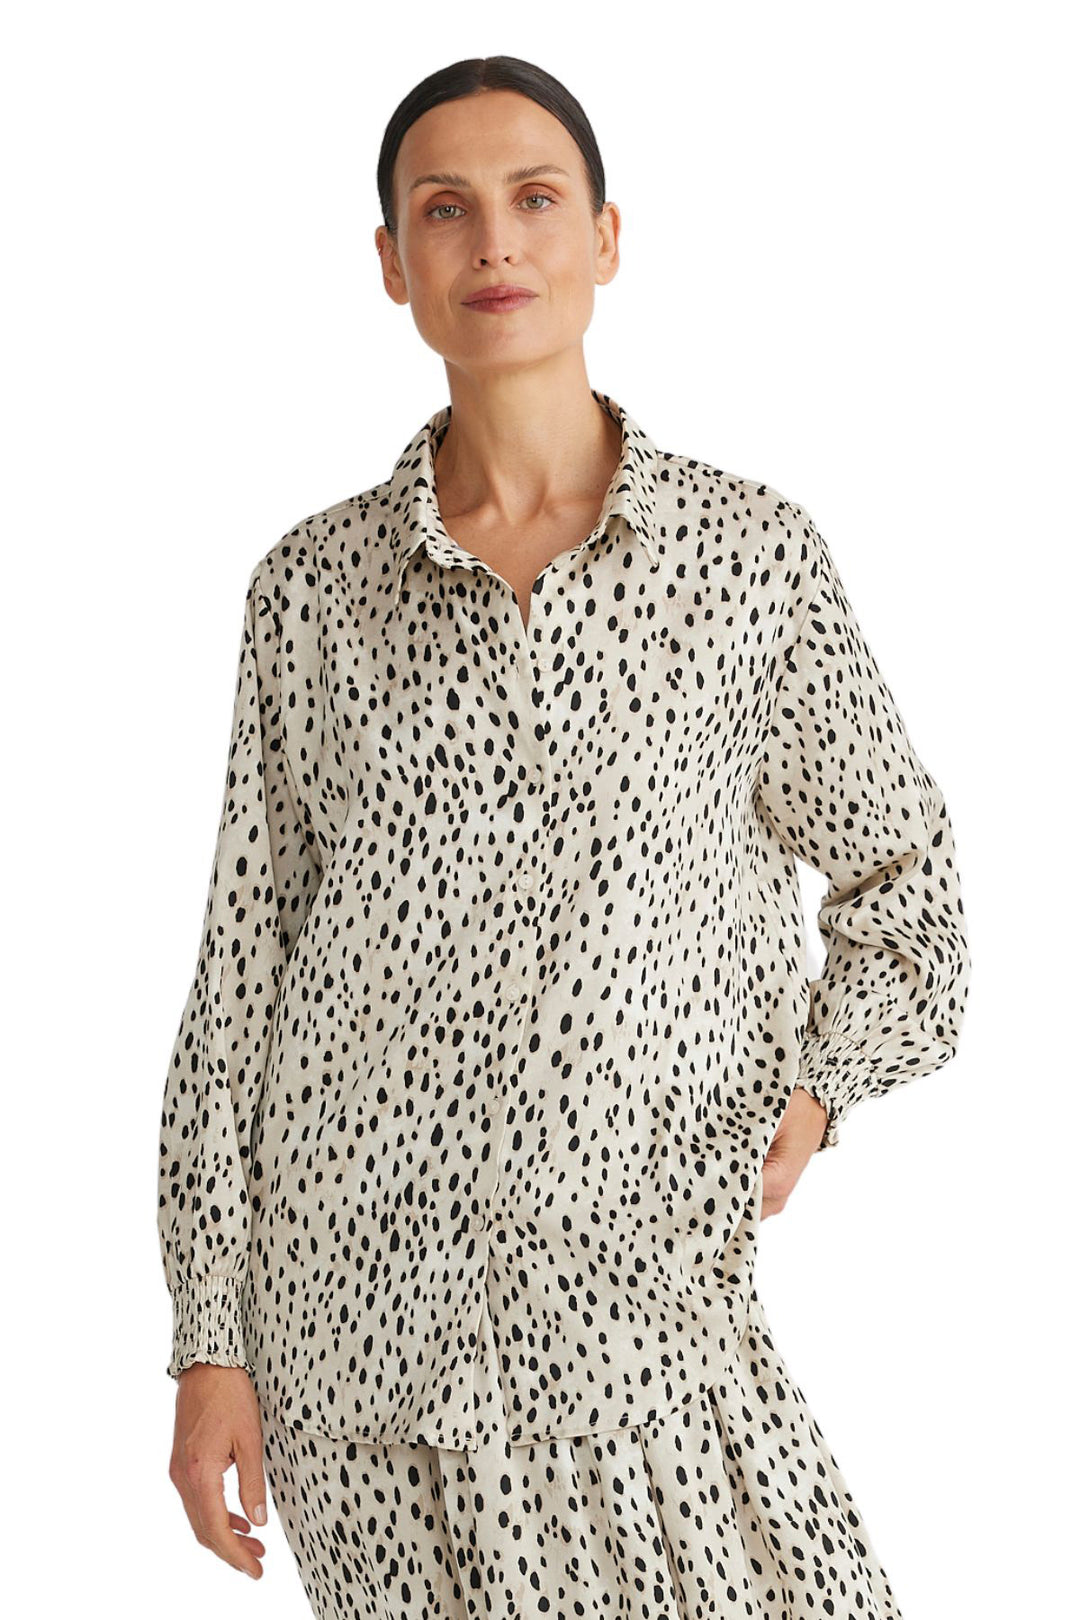 Audrey Shirt  Brand : Brave & True Style : BT6762-1 Fabric : 100% Polyester Print : Ocelot Cold delicate machine wash Classic shirt with collar and front placket Shirred cuff detail Easy wearing shirt true to size